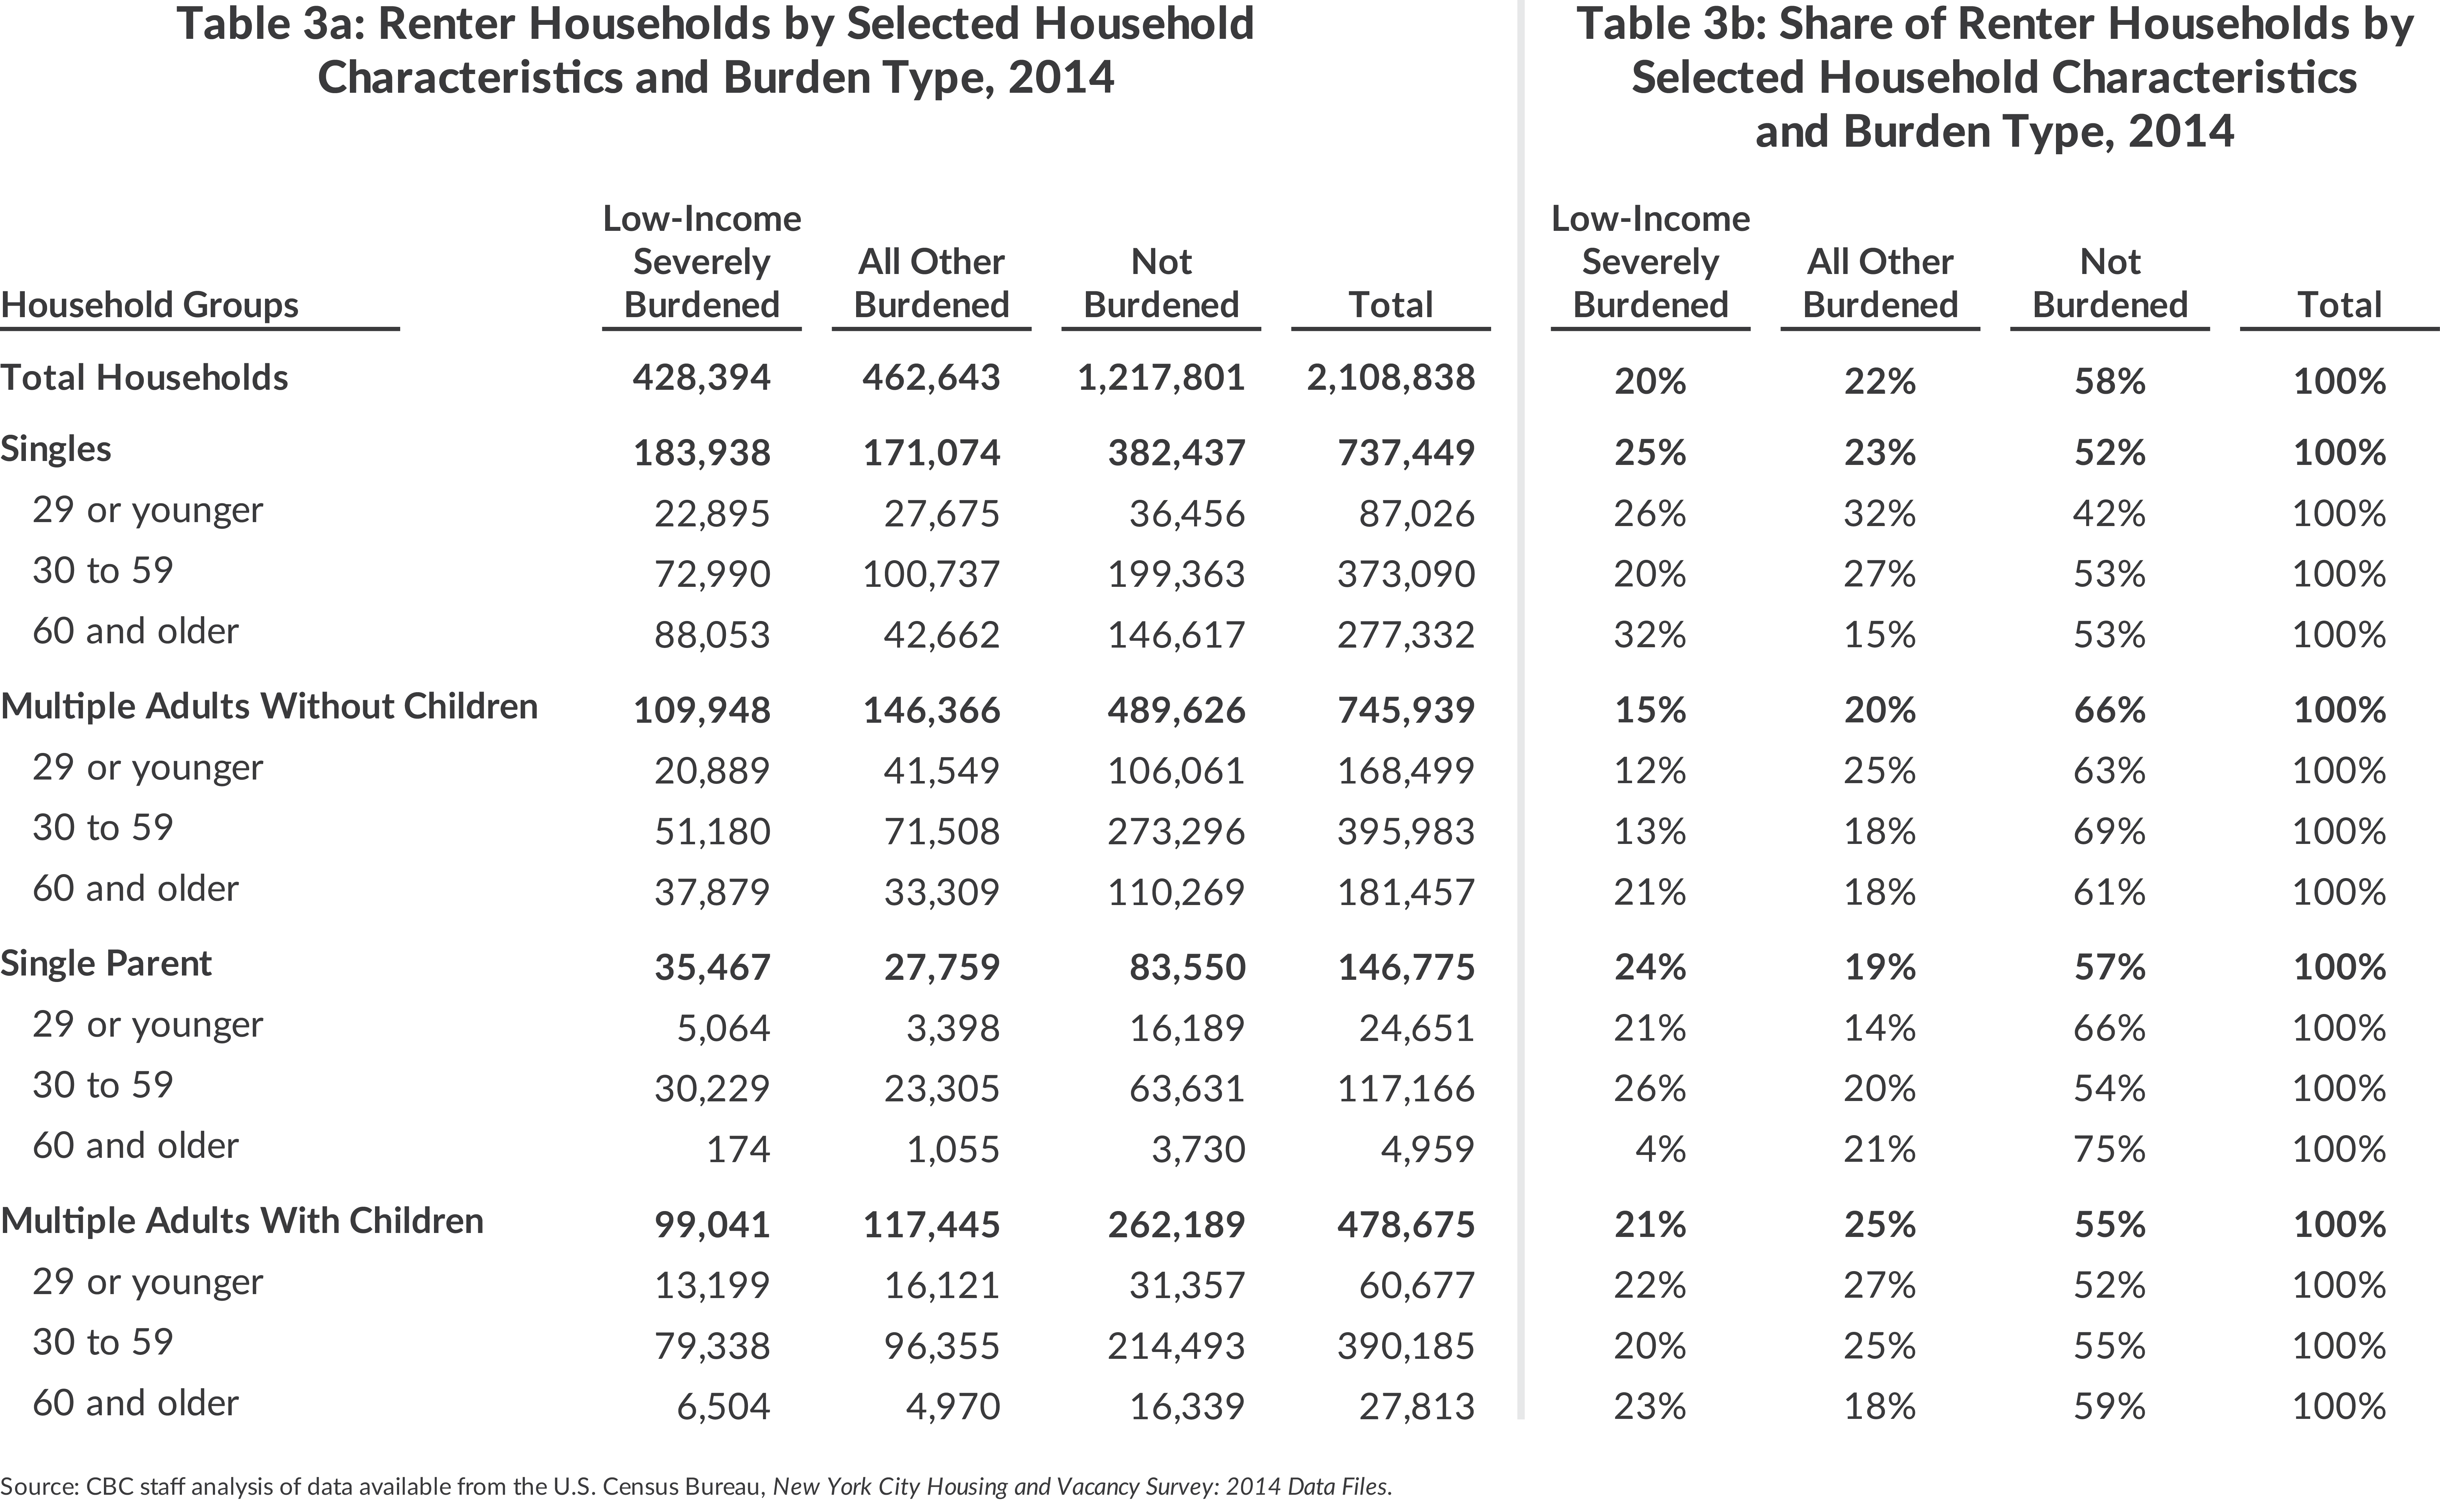 Table 3a: Renter Households by Selected HouseholdCharacteristics and Burden Type, 2014 | GroupsTable 3b: Share of Renter Households bySelected Household Characteristicsand Burden Type